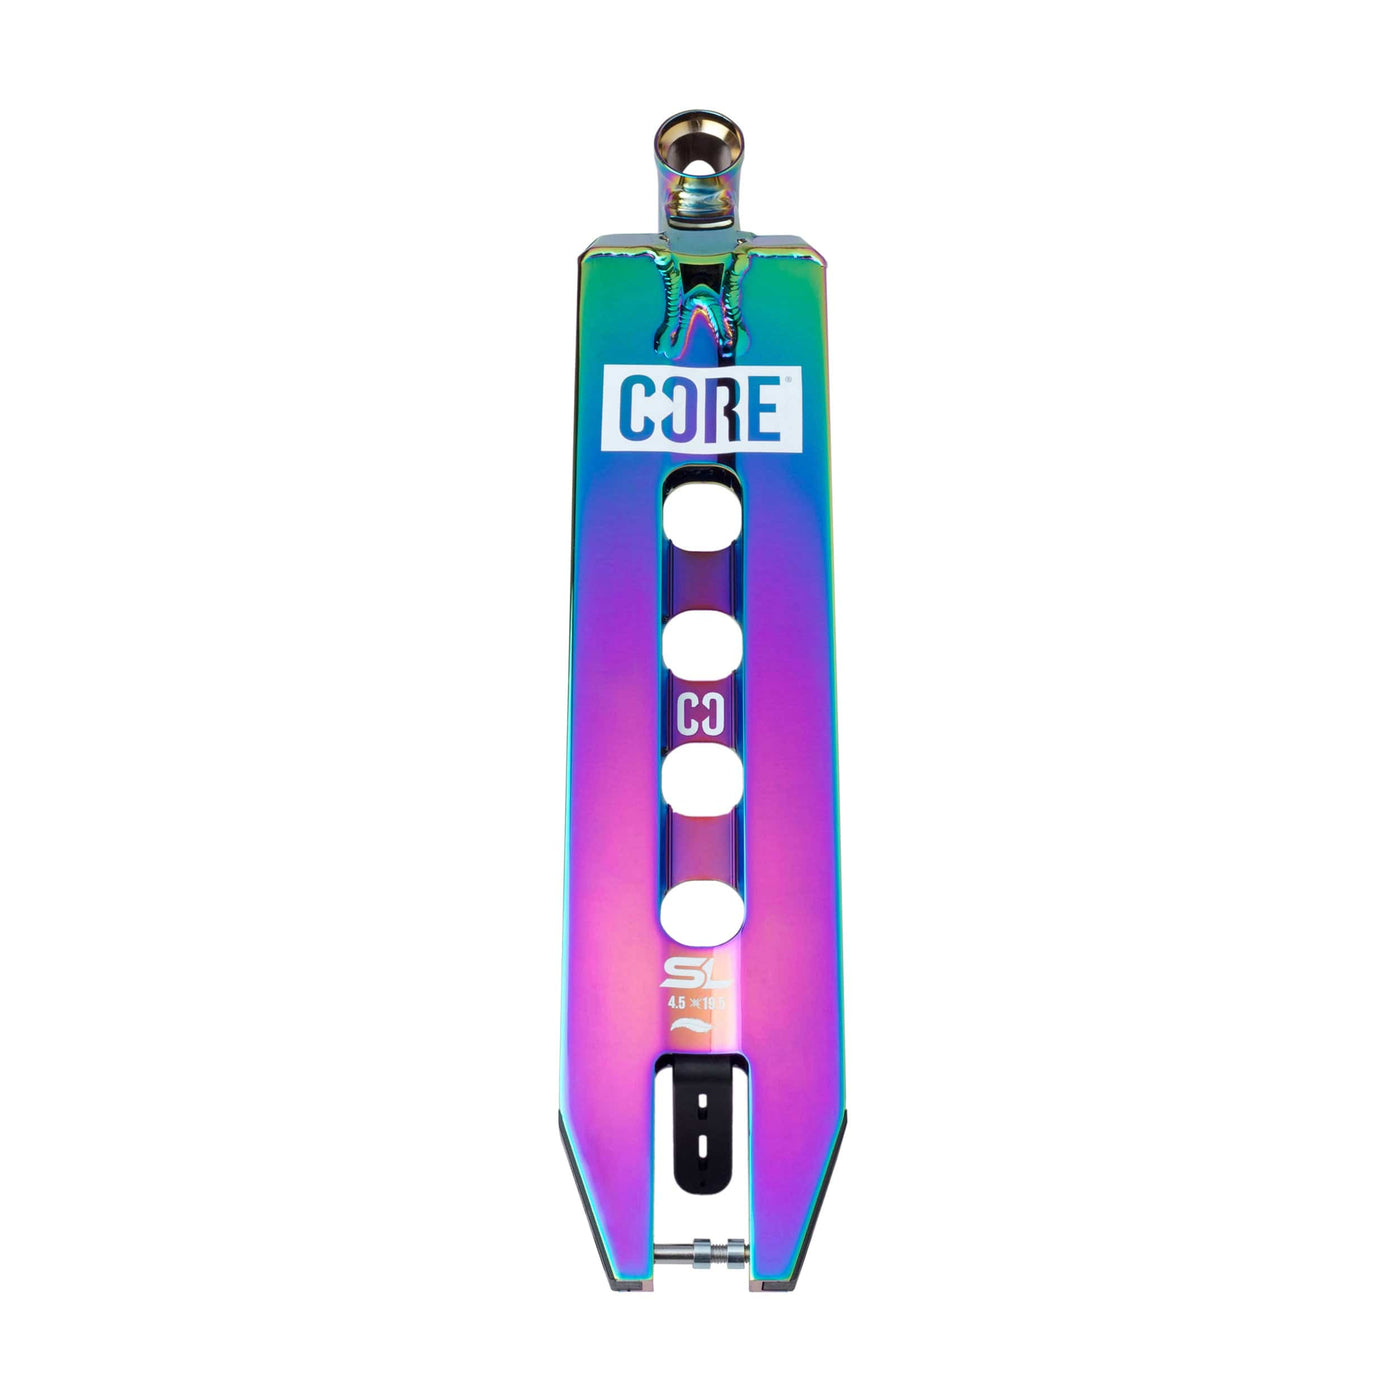 CORE SL1 Scooter Deck Neo Chrome 19.5 x 4.5 I Scooter Deck Bottom